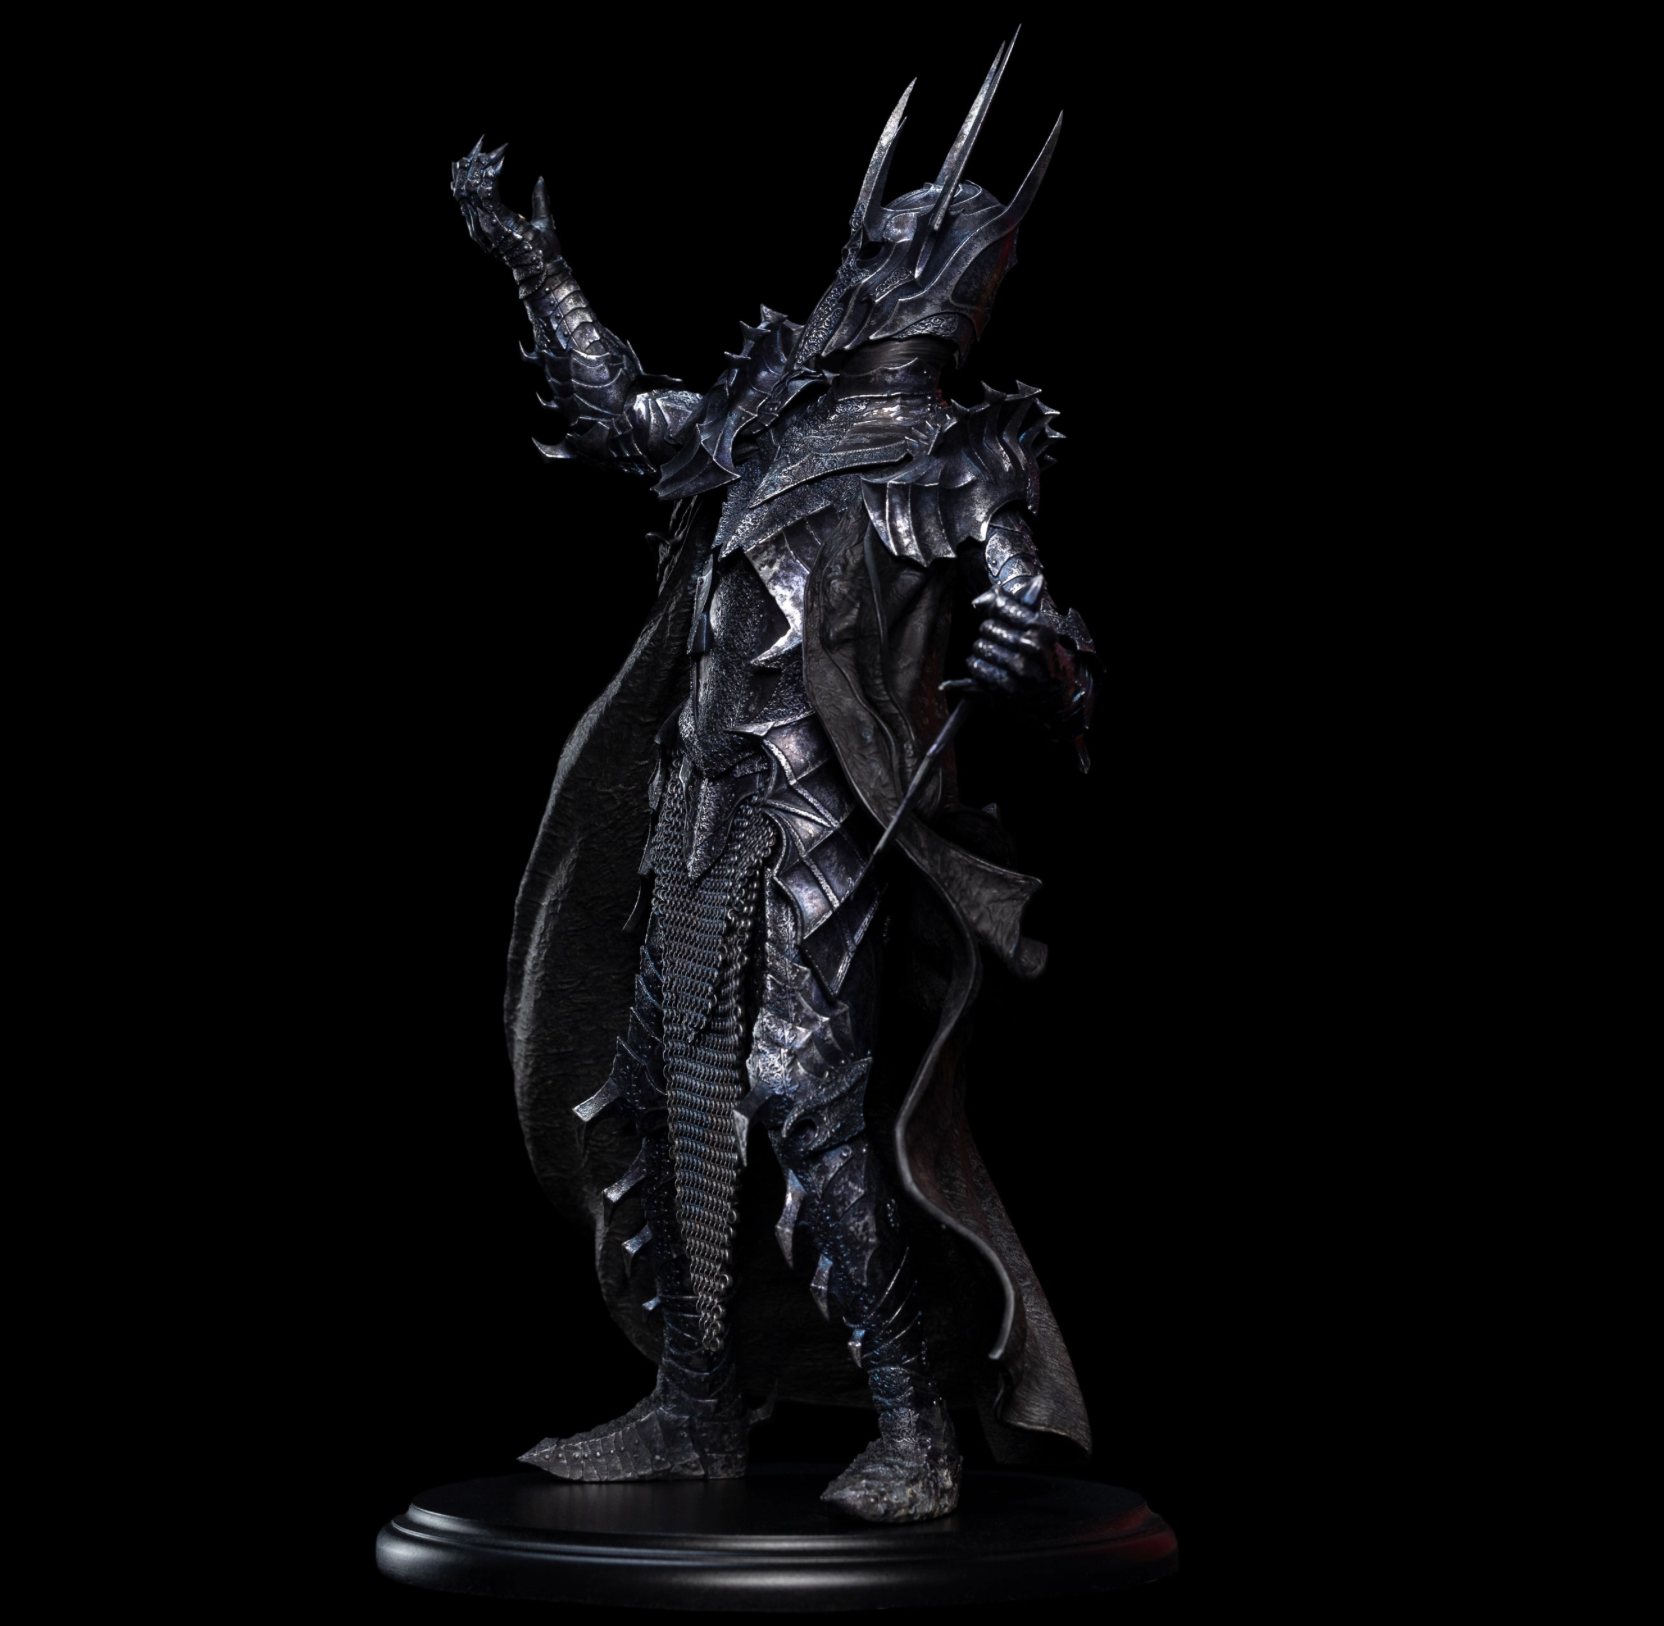 Weta Workshop - Mini Series - The Lord of the Rings - Sauron - Marvelous Toys